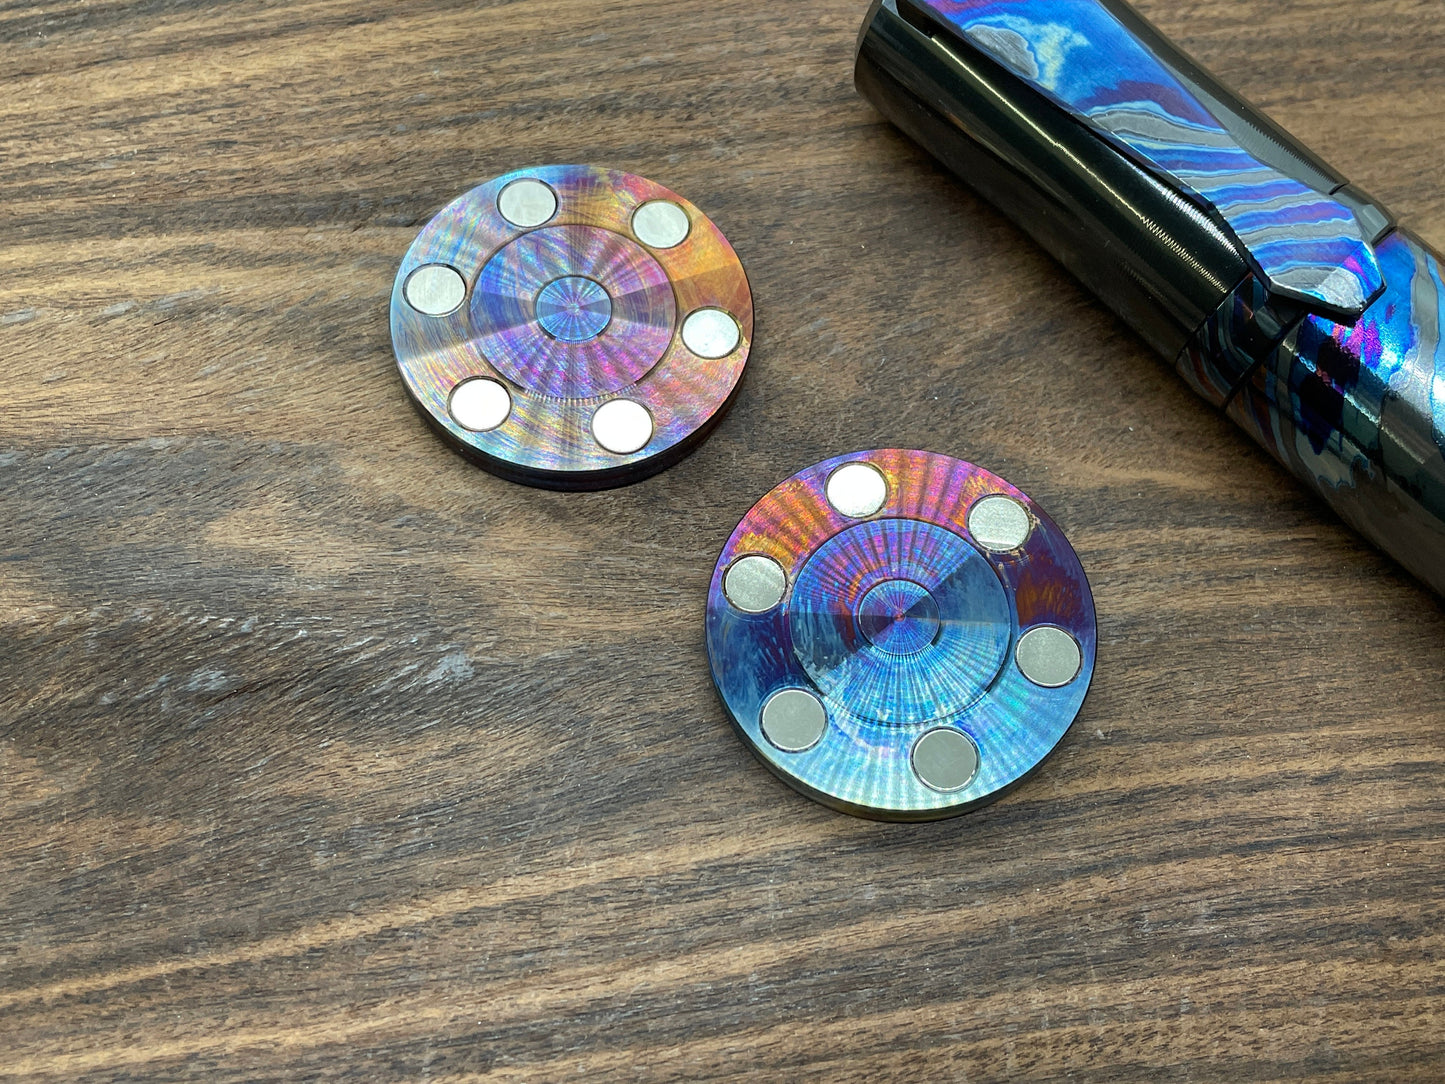 Flamed Sun-Moon CLICKY HAPTIC Coins Stainless Steel Haptic Slider Adhd